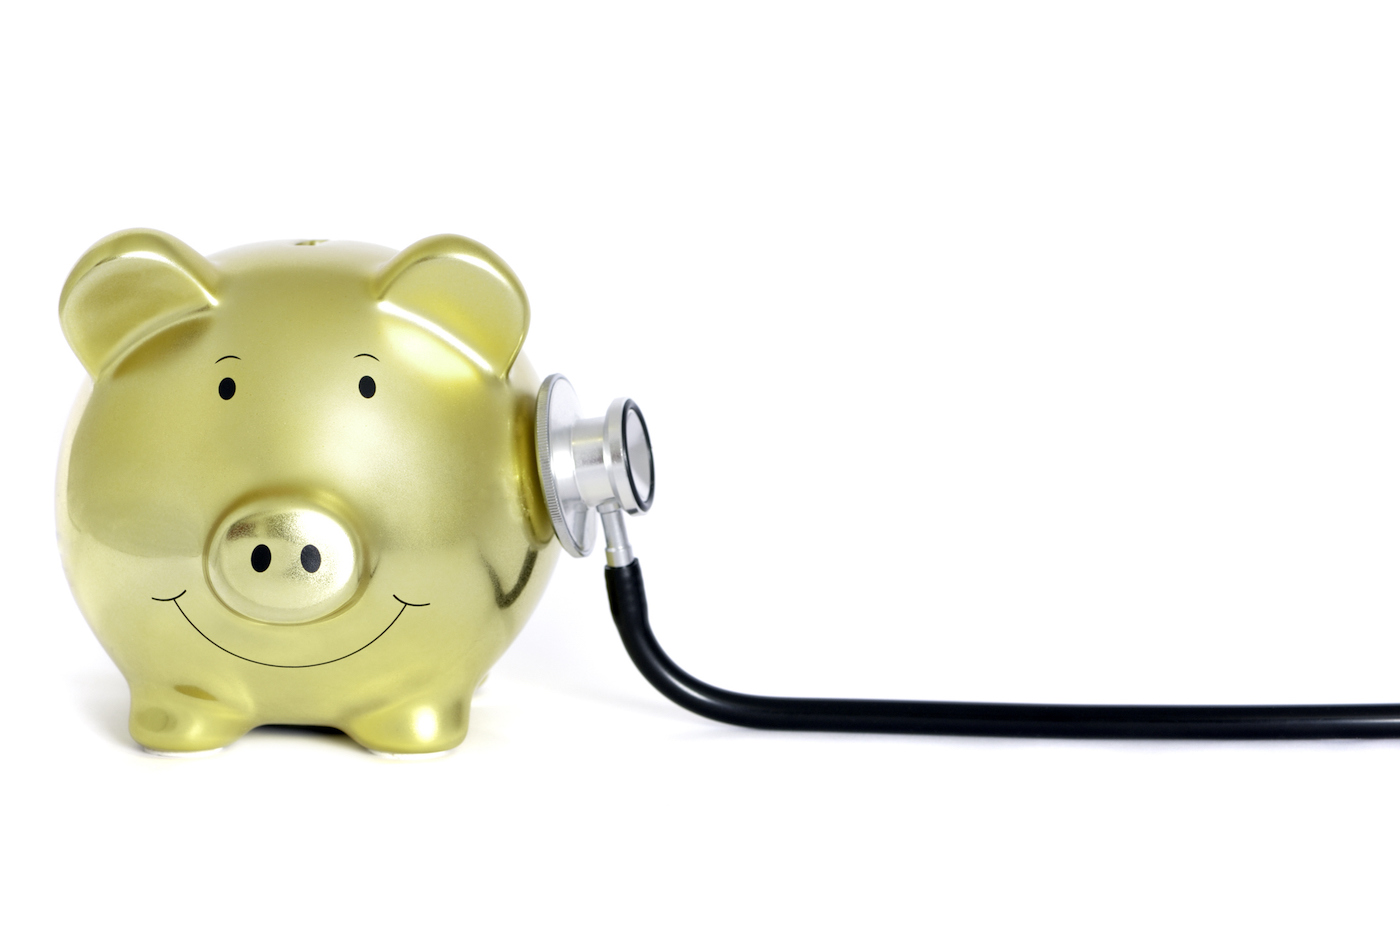 Conceptual image of a golden piggy bank and stethoscope isolated on pure white, selective focus on the piggy bank